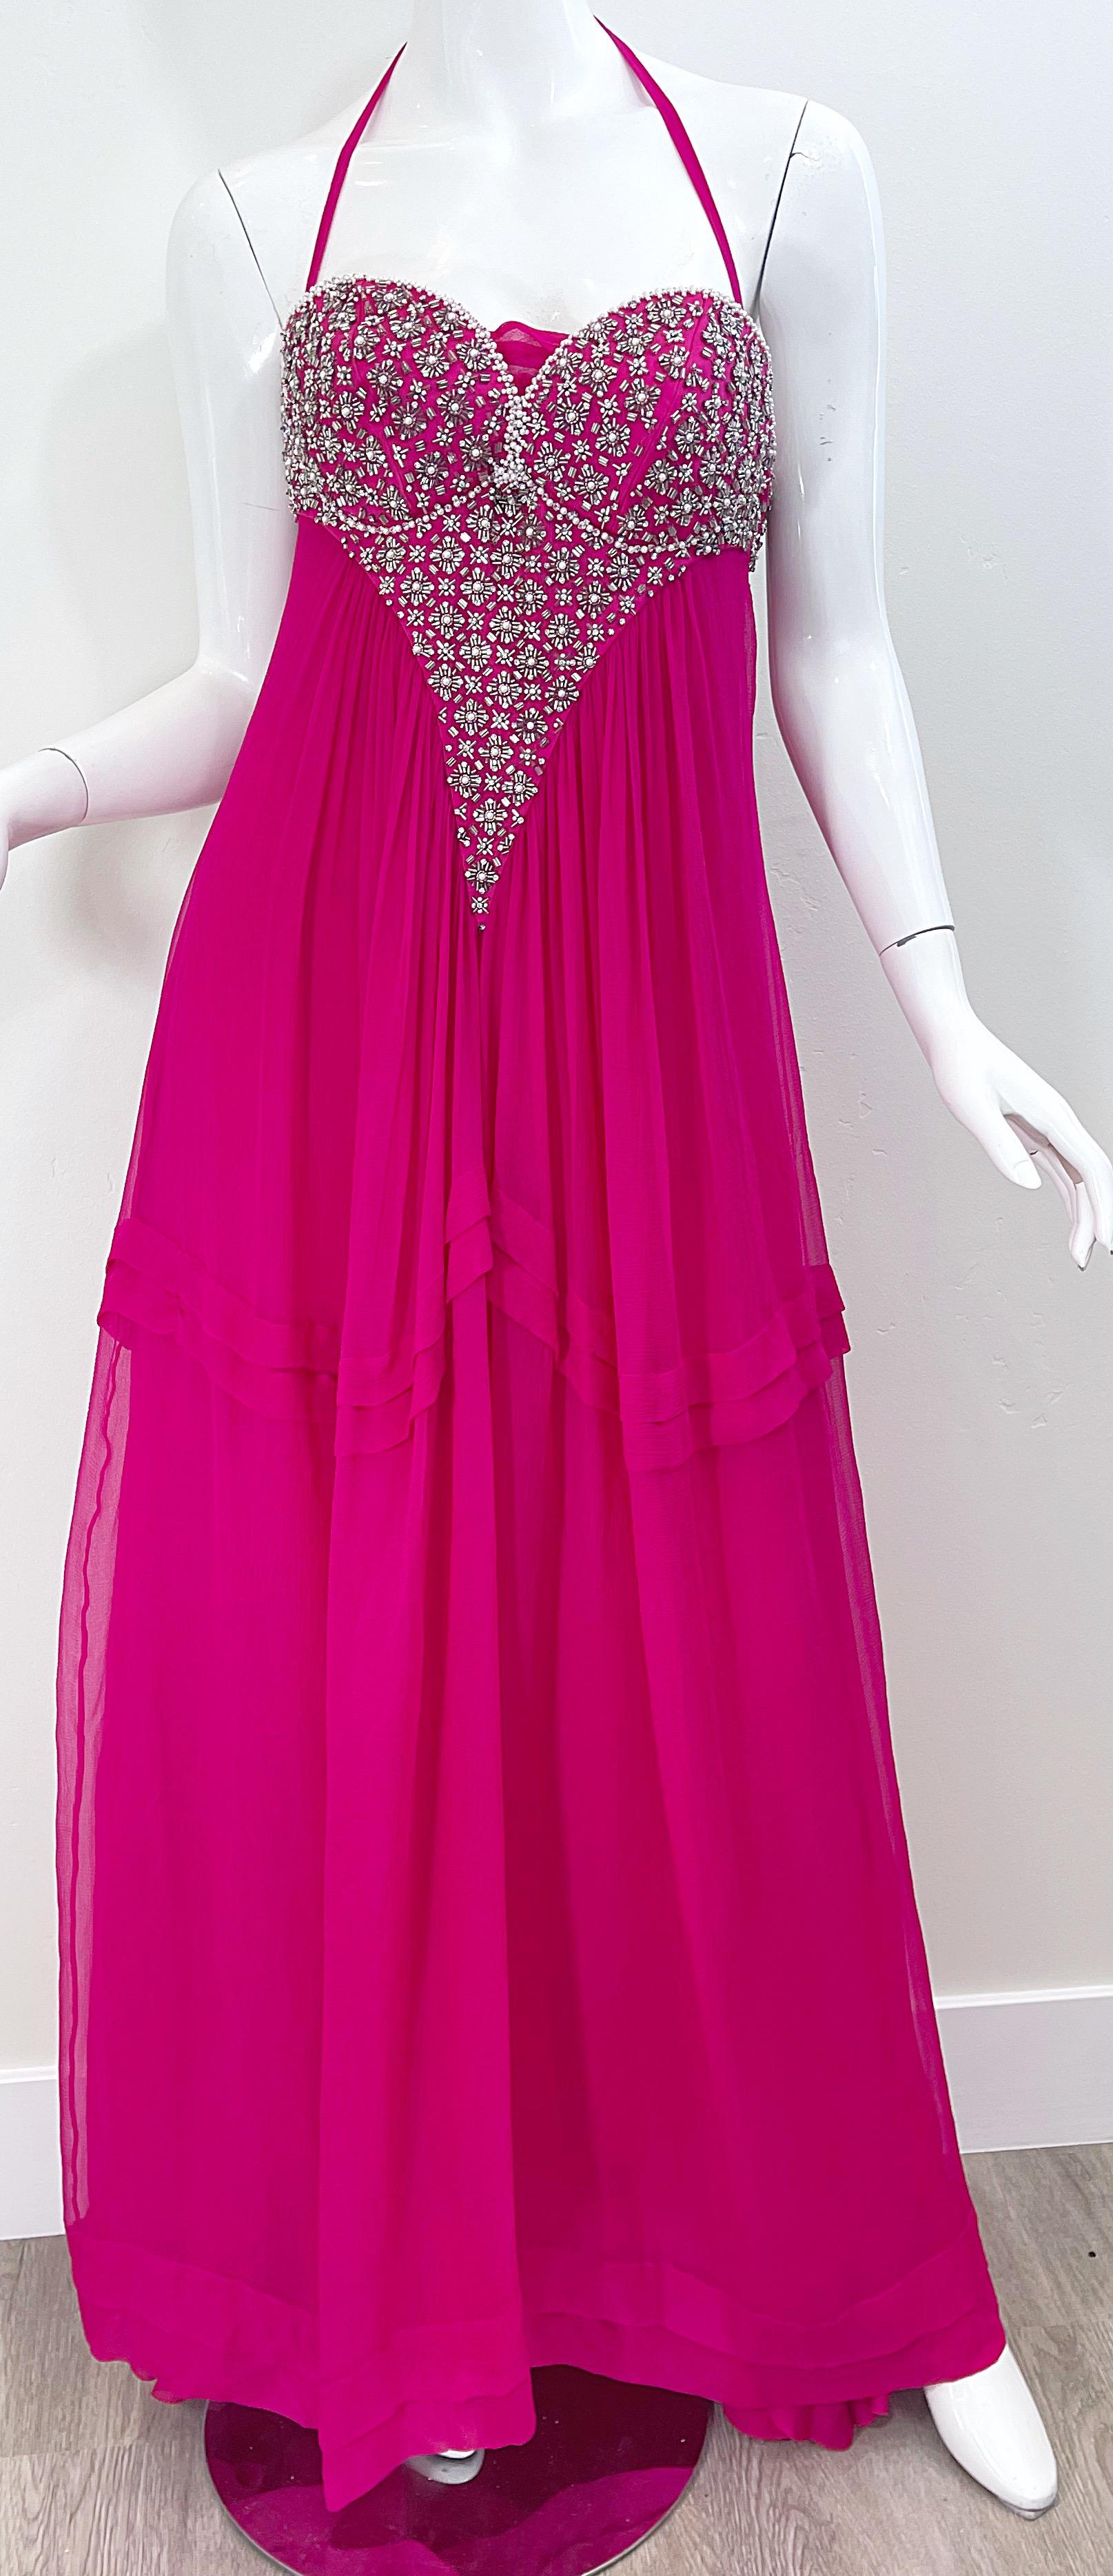 1990s Roberto Cavalli Size 44 / US 8 Hot Pink Chiffon Beaded Rhinestone 90s Gown In Excellent Condition For Sale In San Diego, CA